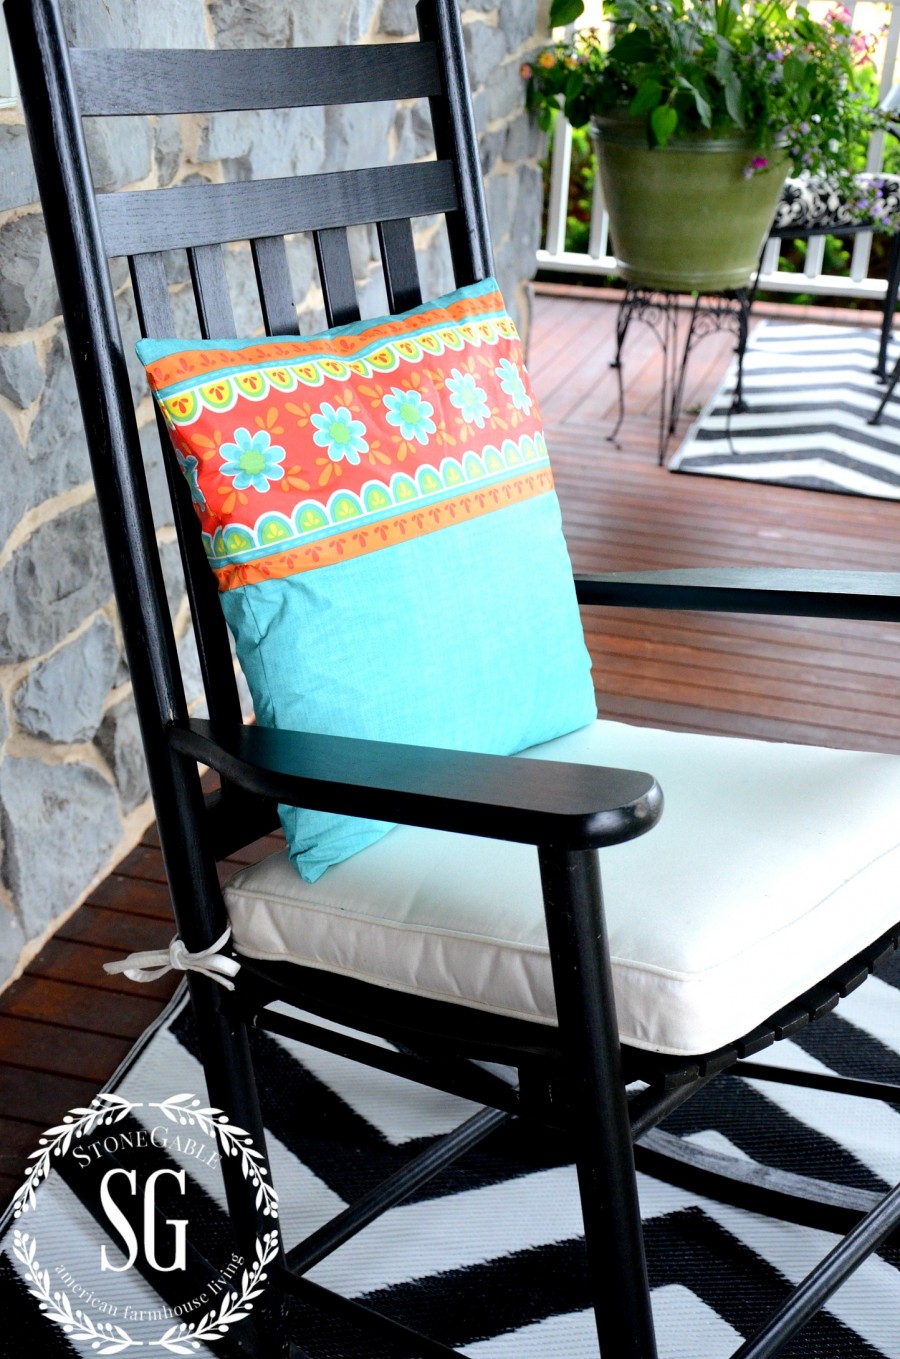 SEW EASY OUTDOOR PILLOW FROM A VINYL TABLESCLOTH-waterproof- stonegableblog.com